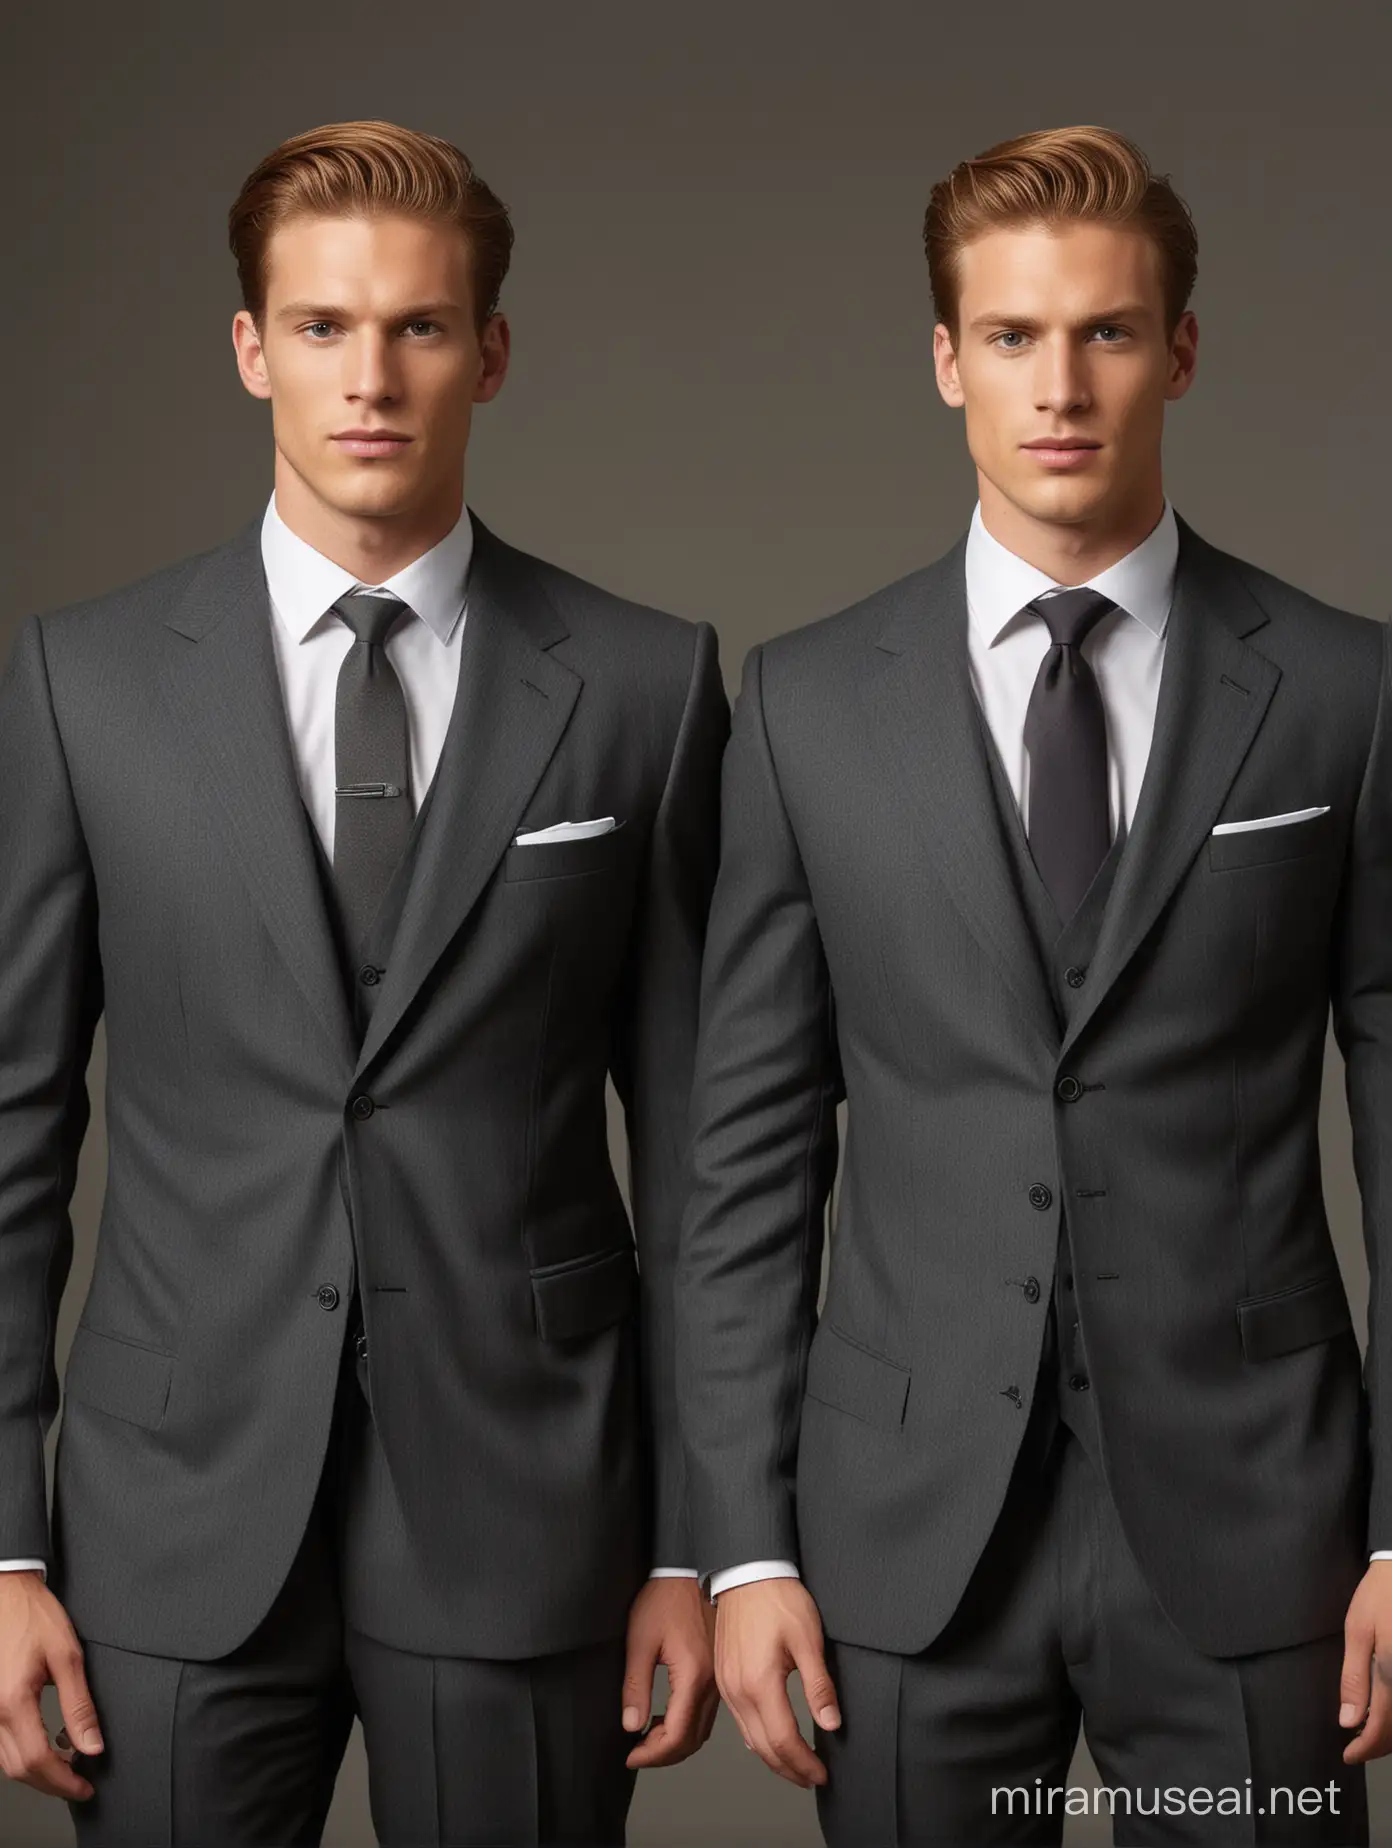 Twin Men in Charcoal Suits Elegant Doppelgngers with Light Chestnut Hair